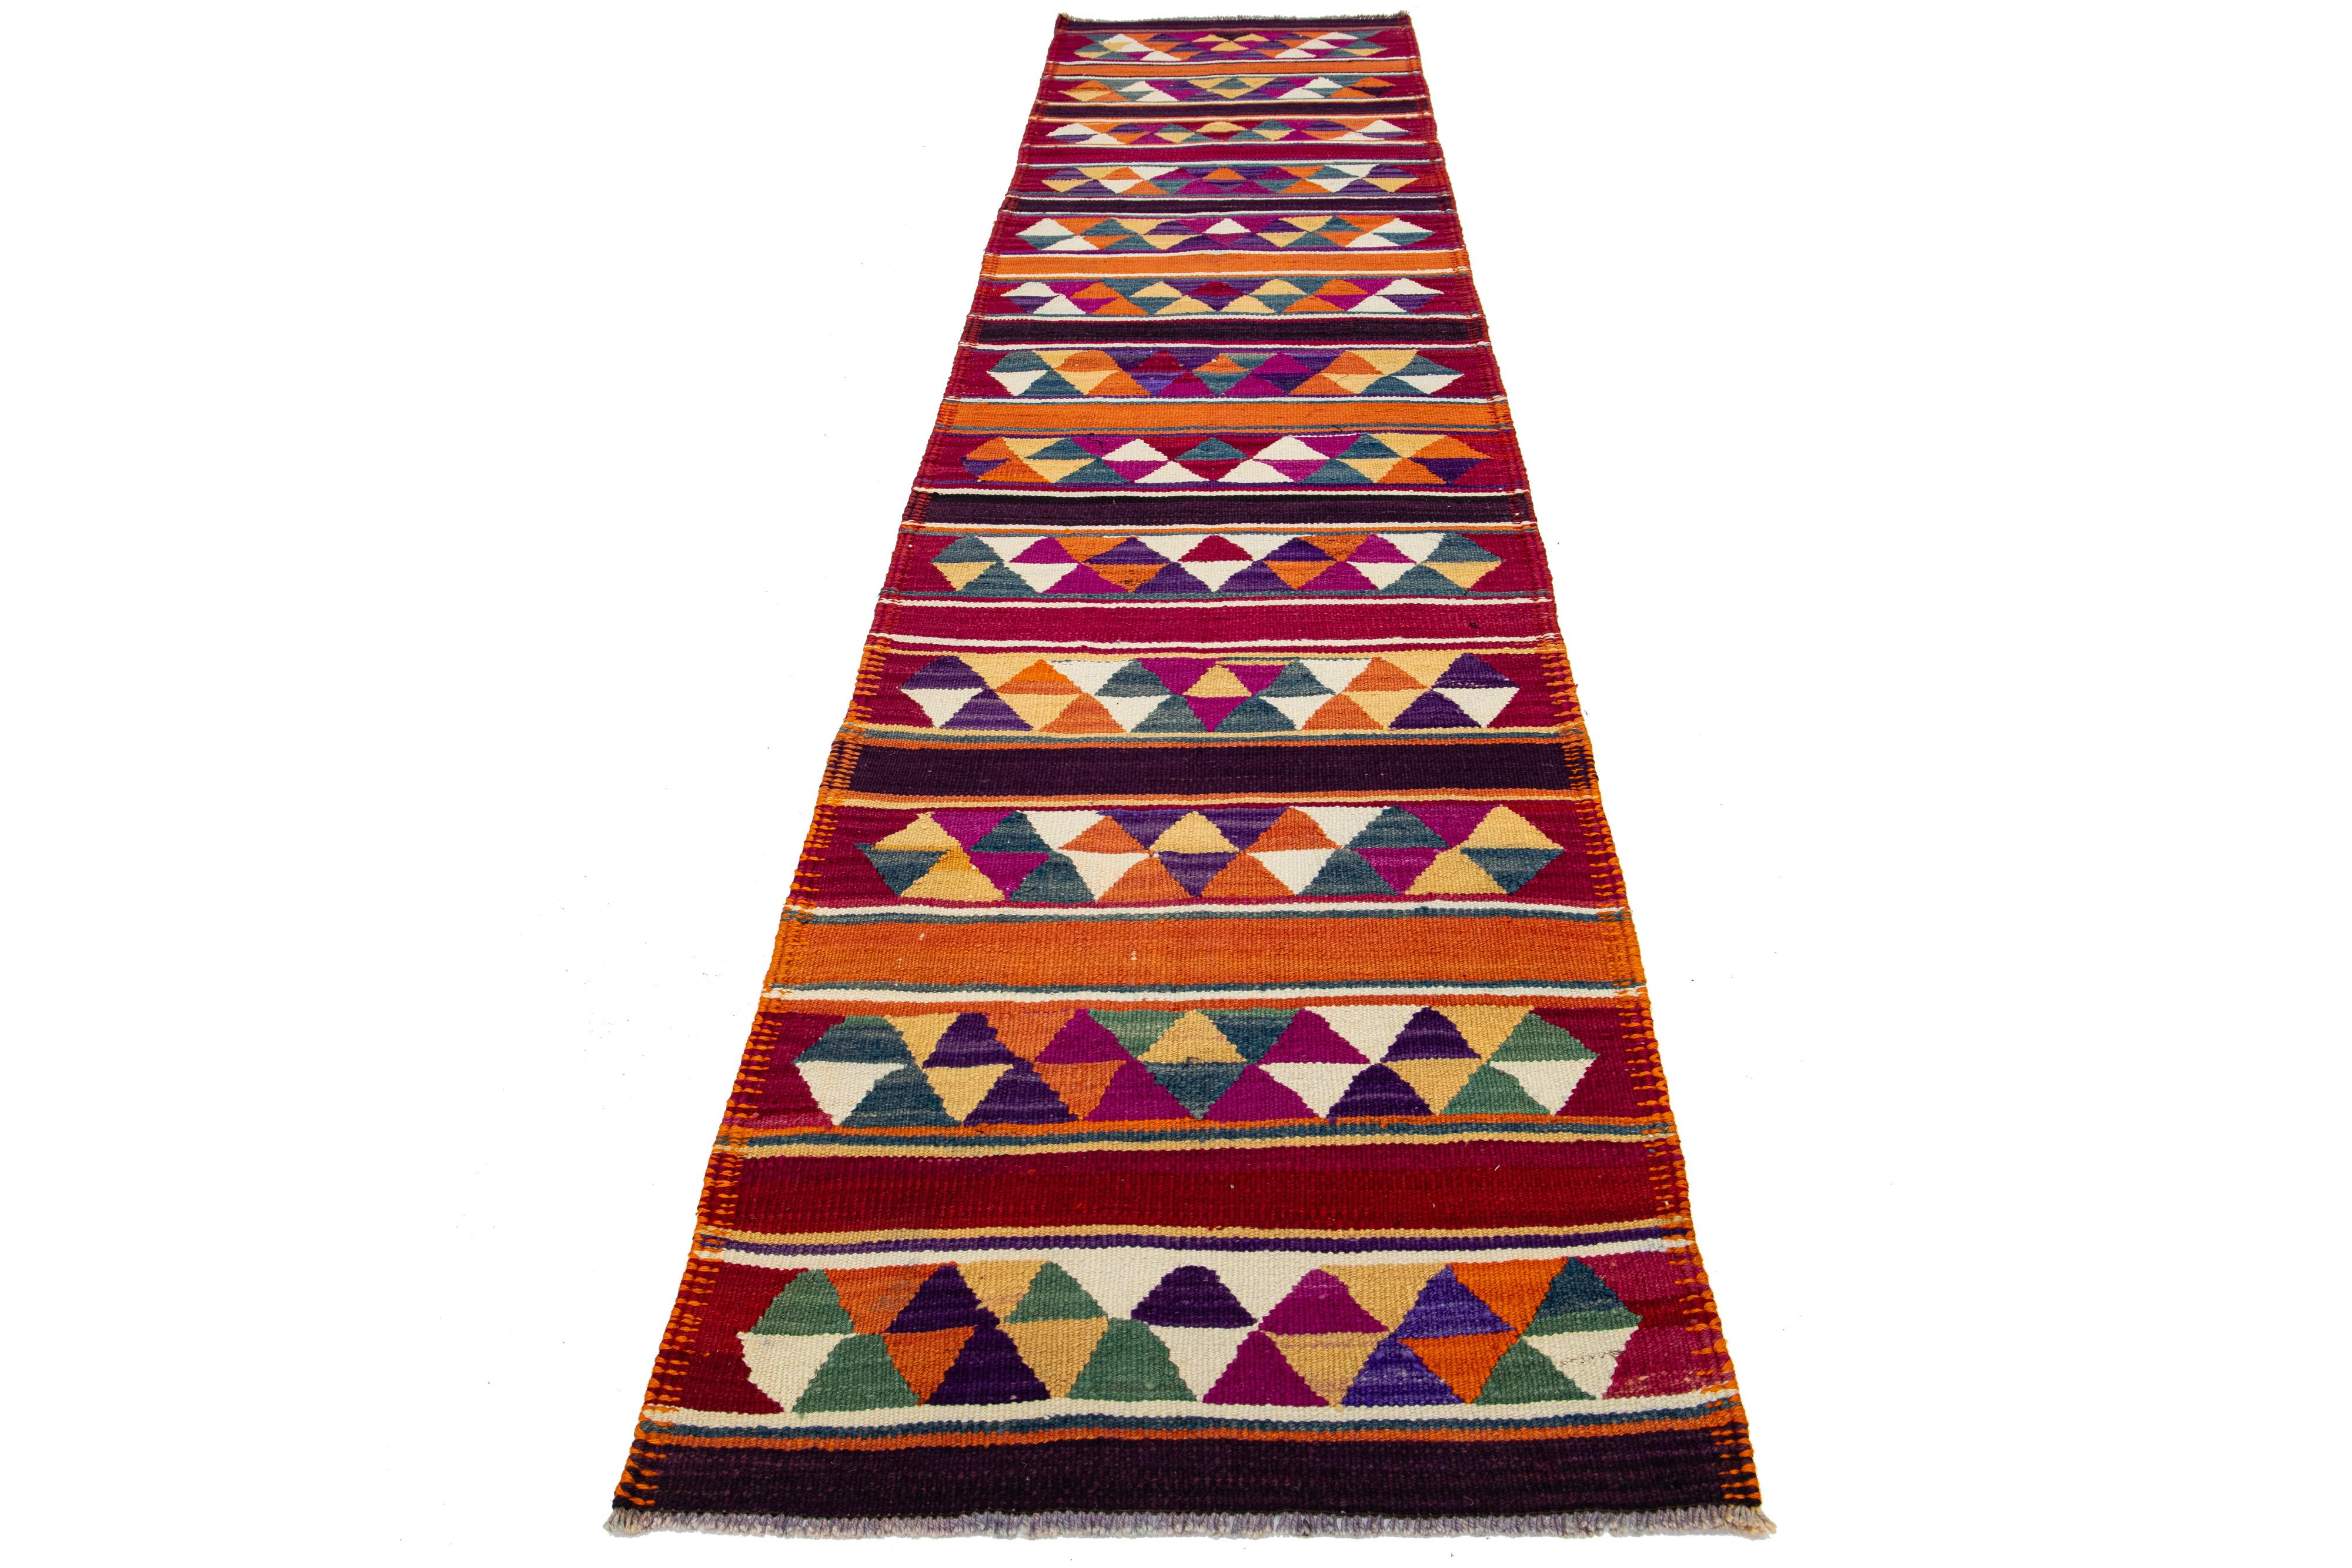 This exquisite wool kilim rug features a stunning all-over geometric design and a vibrant multi-colored field. The meticulous, handmade craftsmanship ensures a one-of-a-kind addition to any space.

This rug measures 2'9